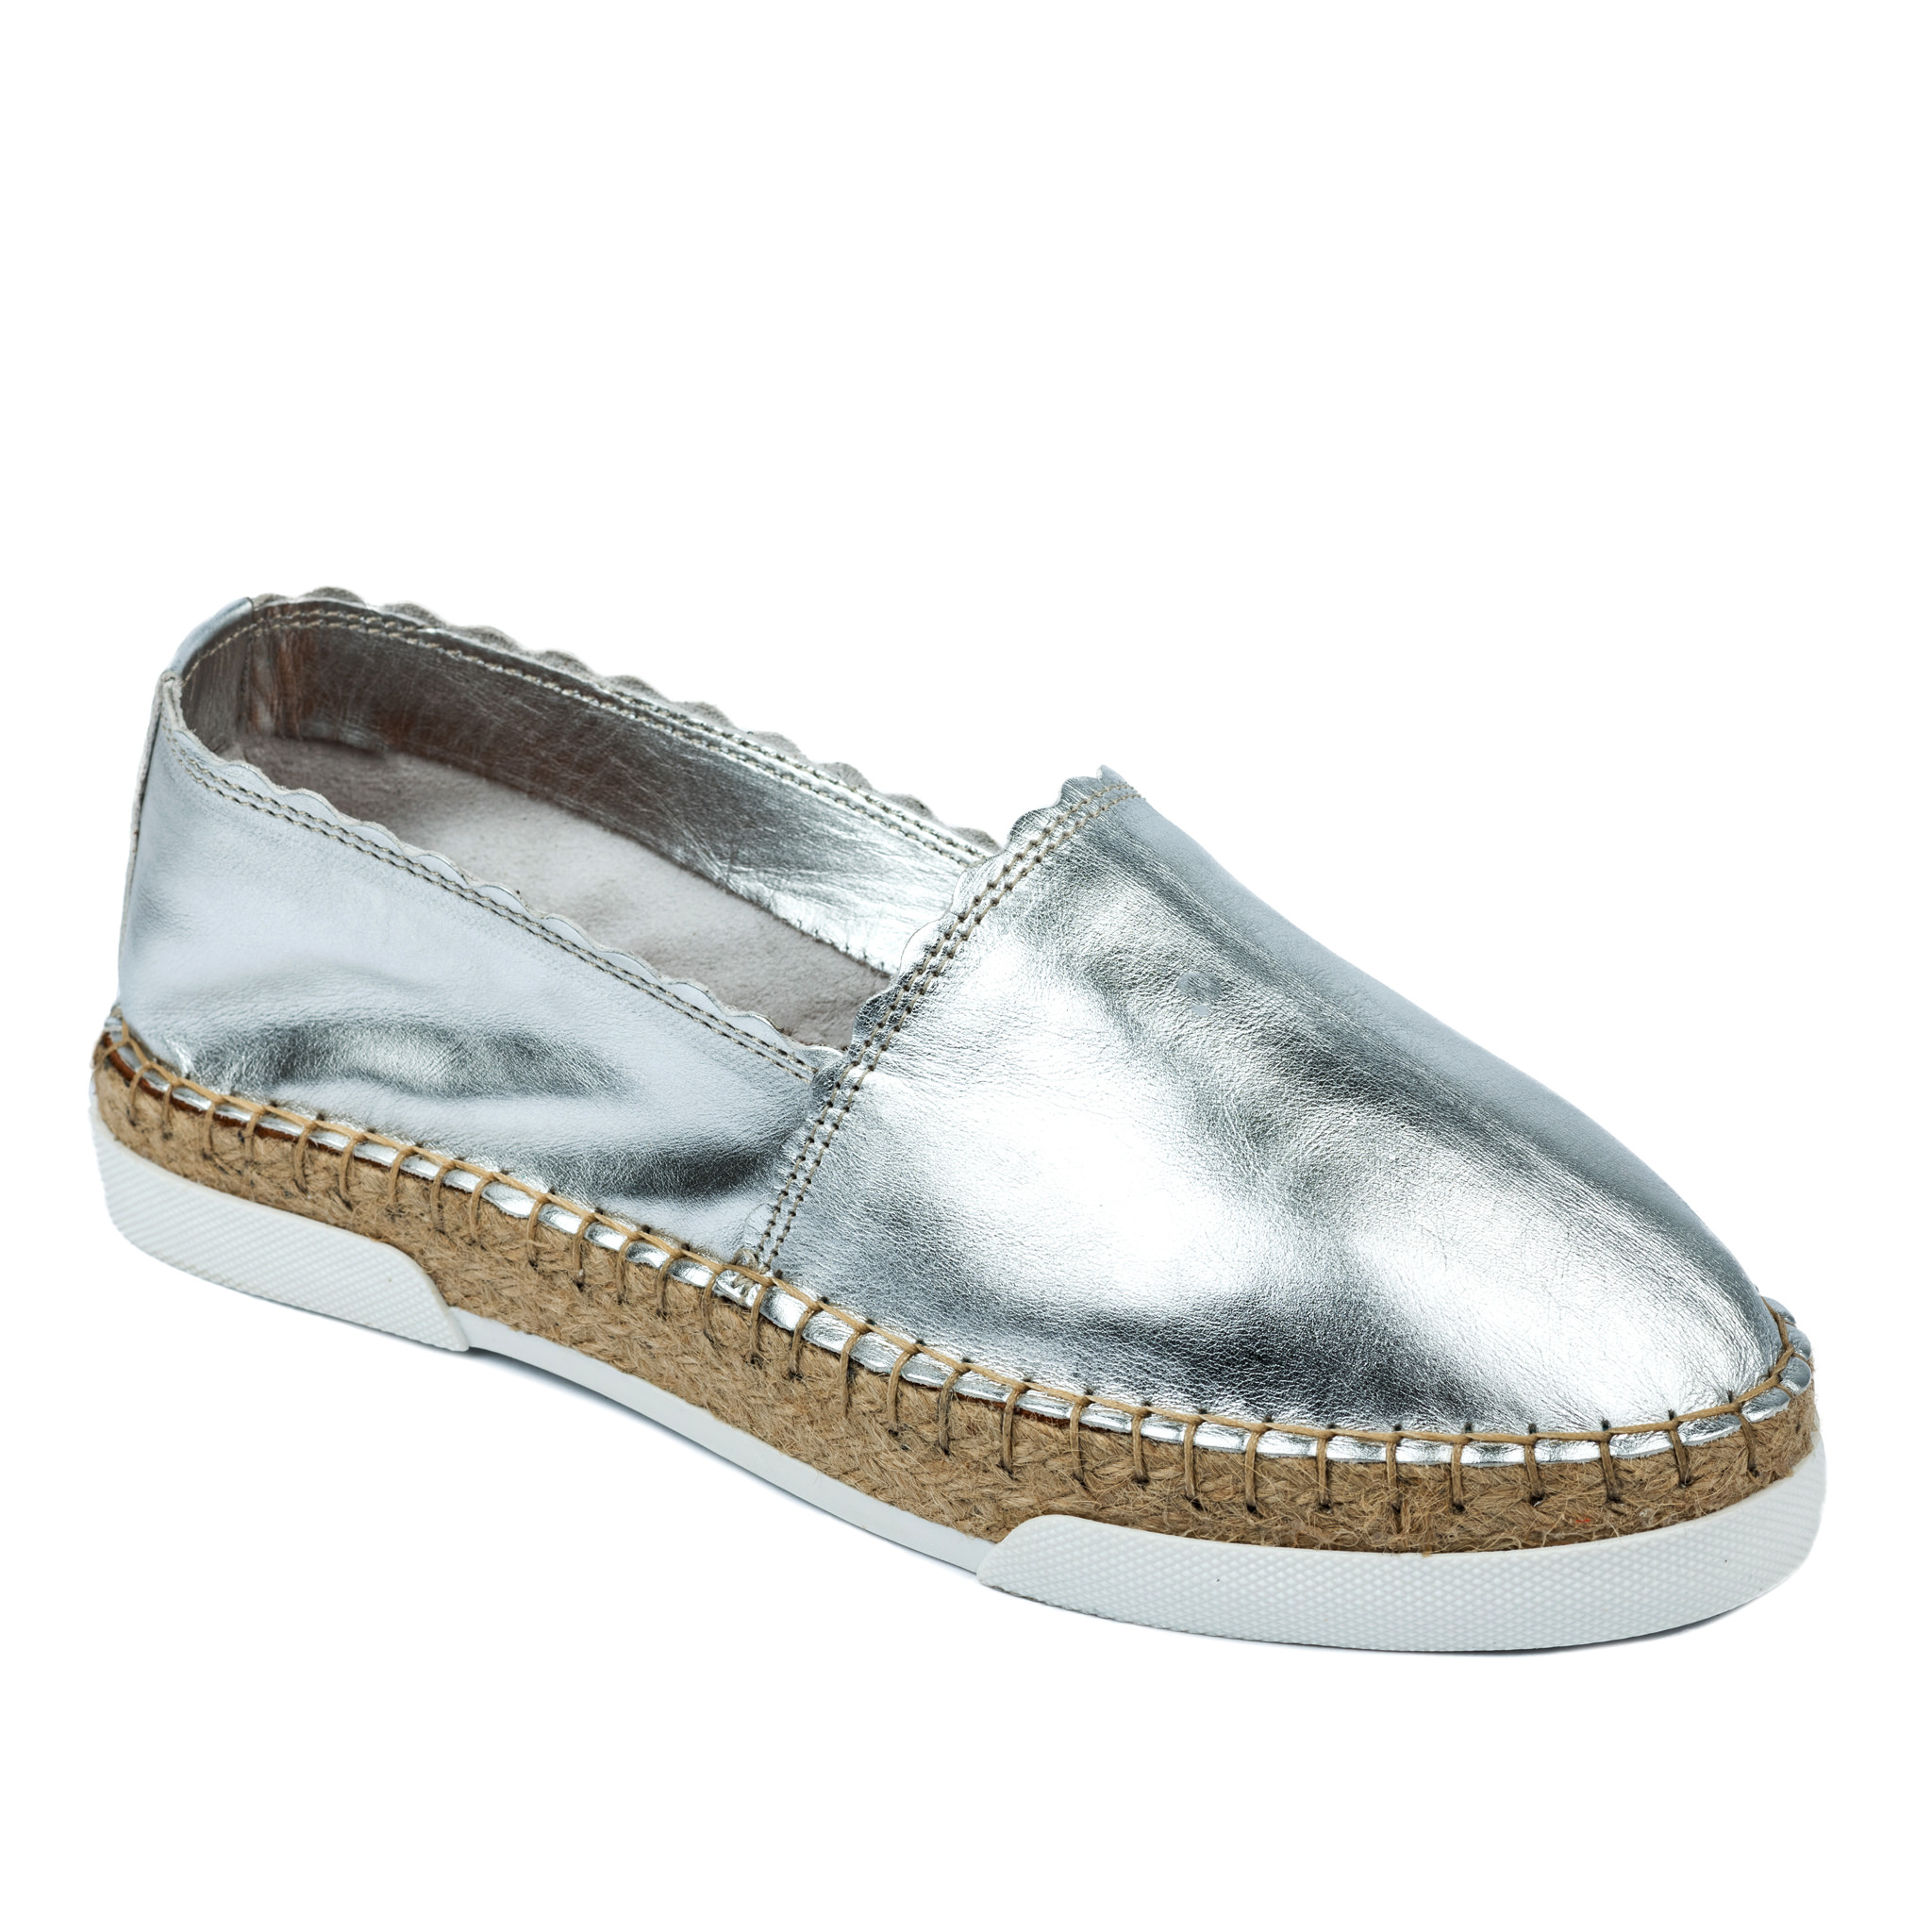 Leather espadrilles A575 - SILVER